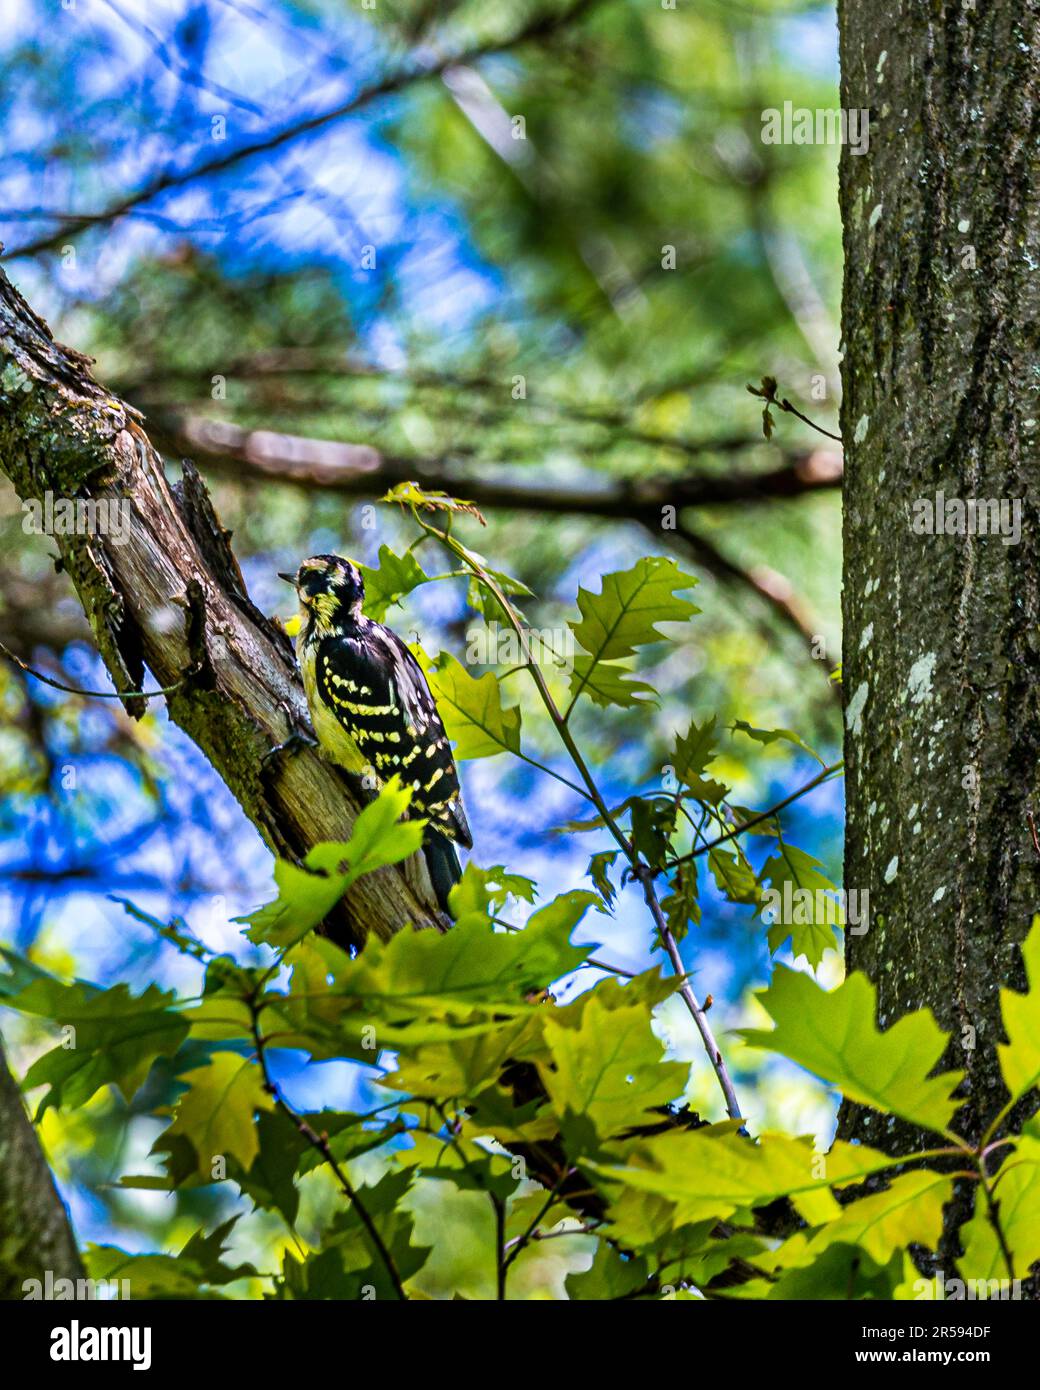 Woodpecker bird. In the Canadian forest, in the bush, I met a woodpecker, a bird that worked hard, making a specific knocking sound around. Stock Photo